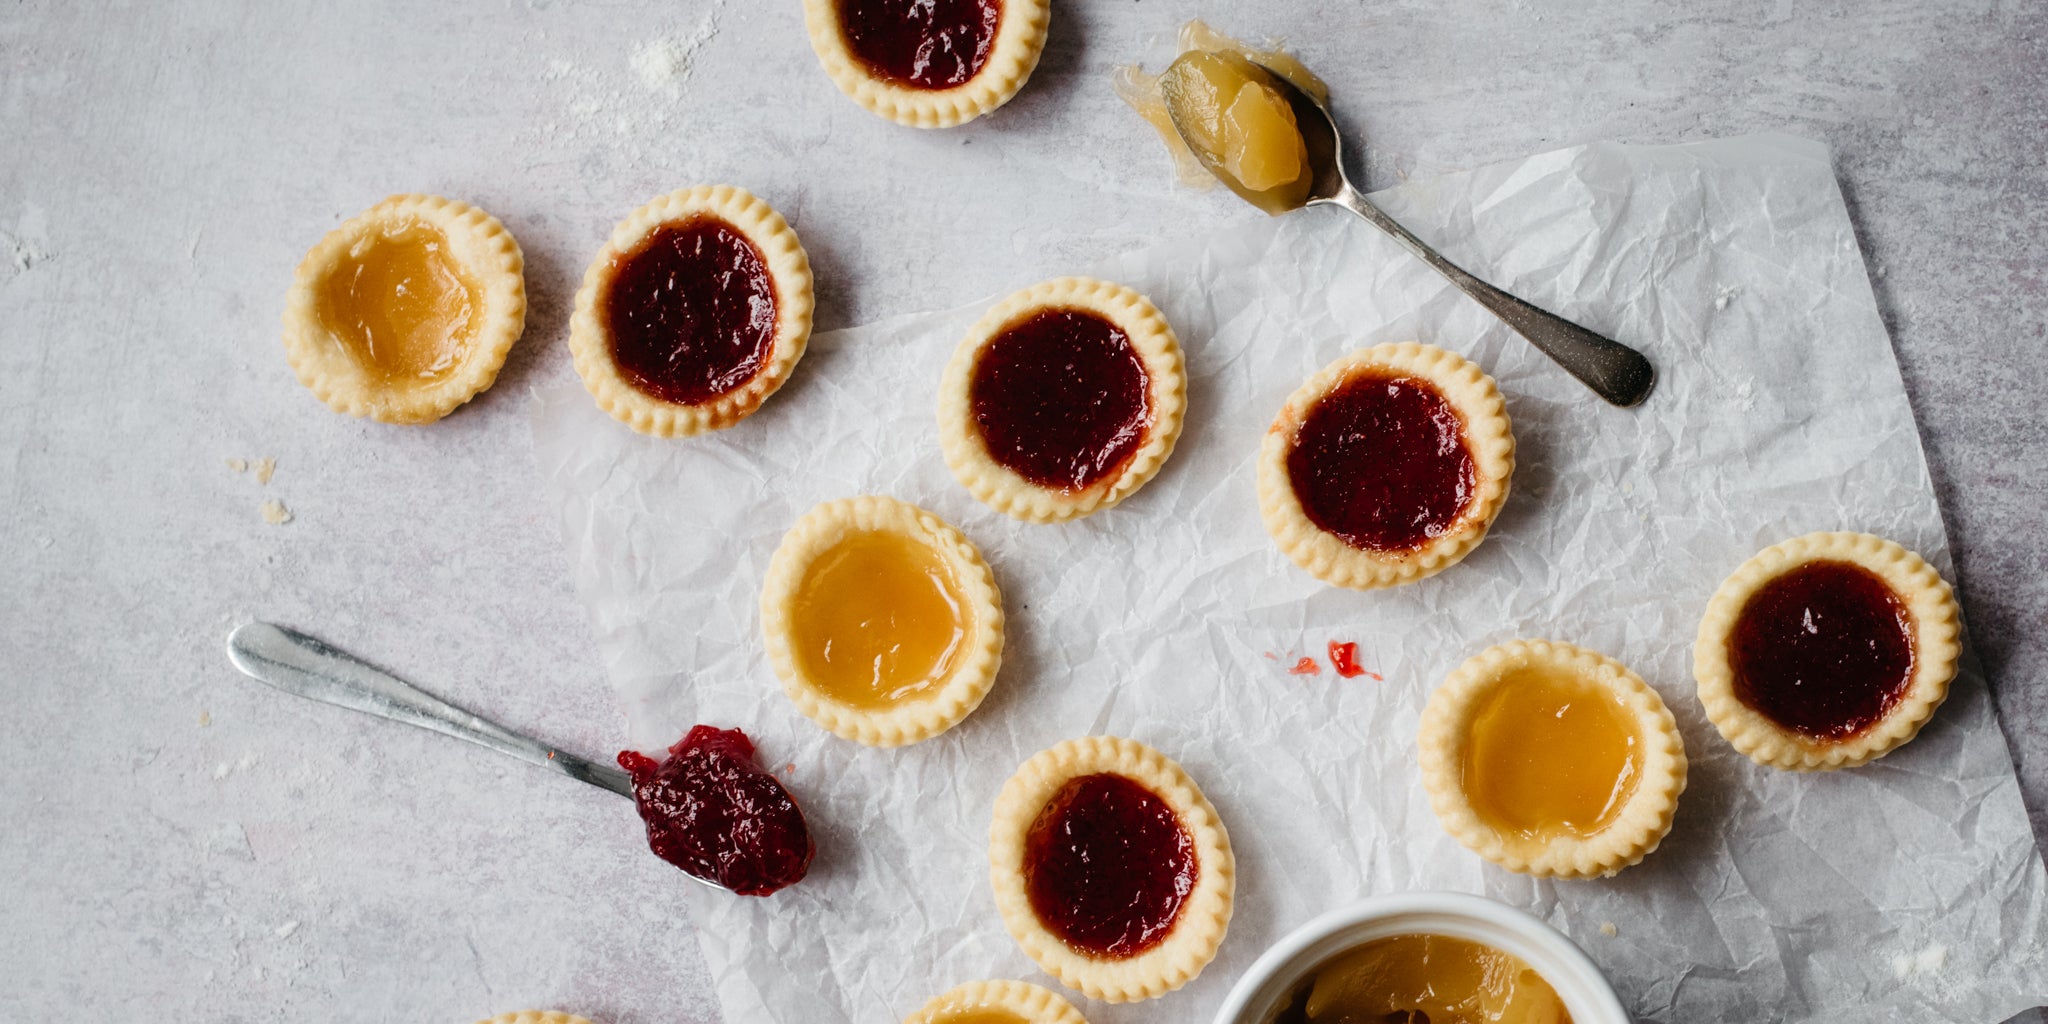 Apricot & Strawberry Jam Tarts served on parchment paper with spoons covered in jam